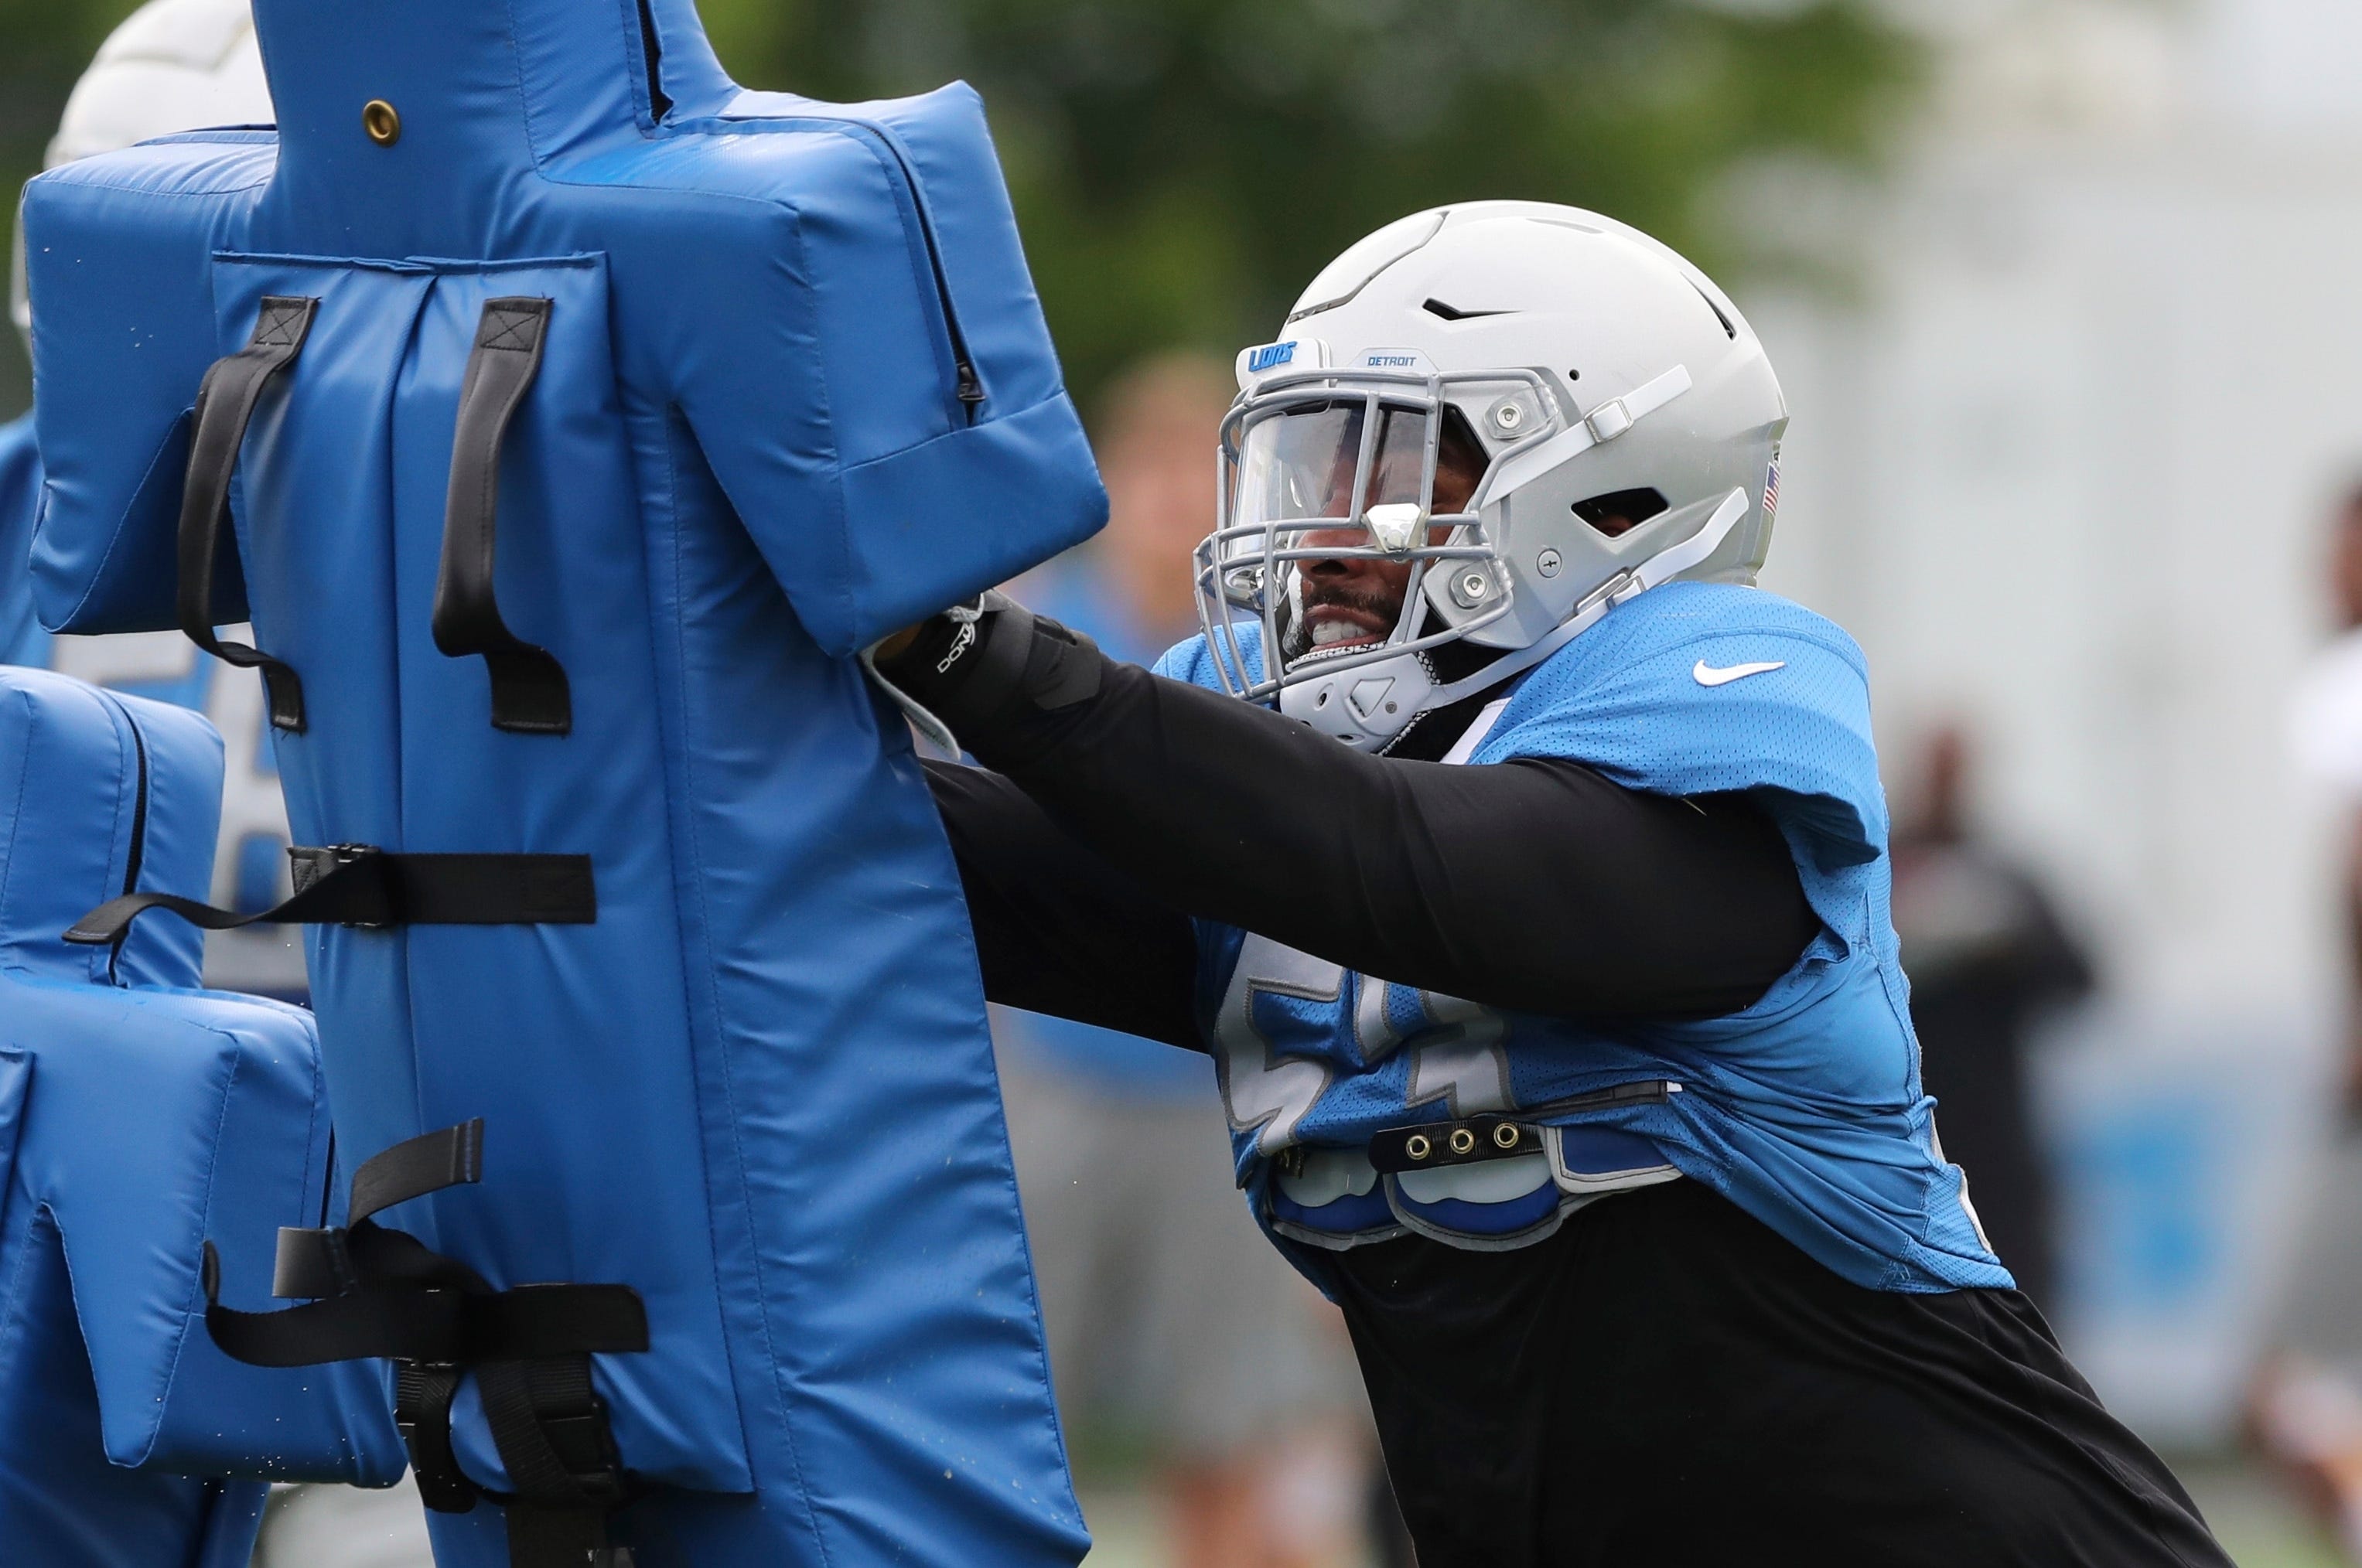 Lions linebacker Trevor Bates was arrested early Saturday morning, the team confirmed.